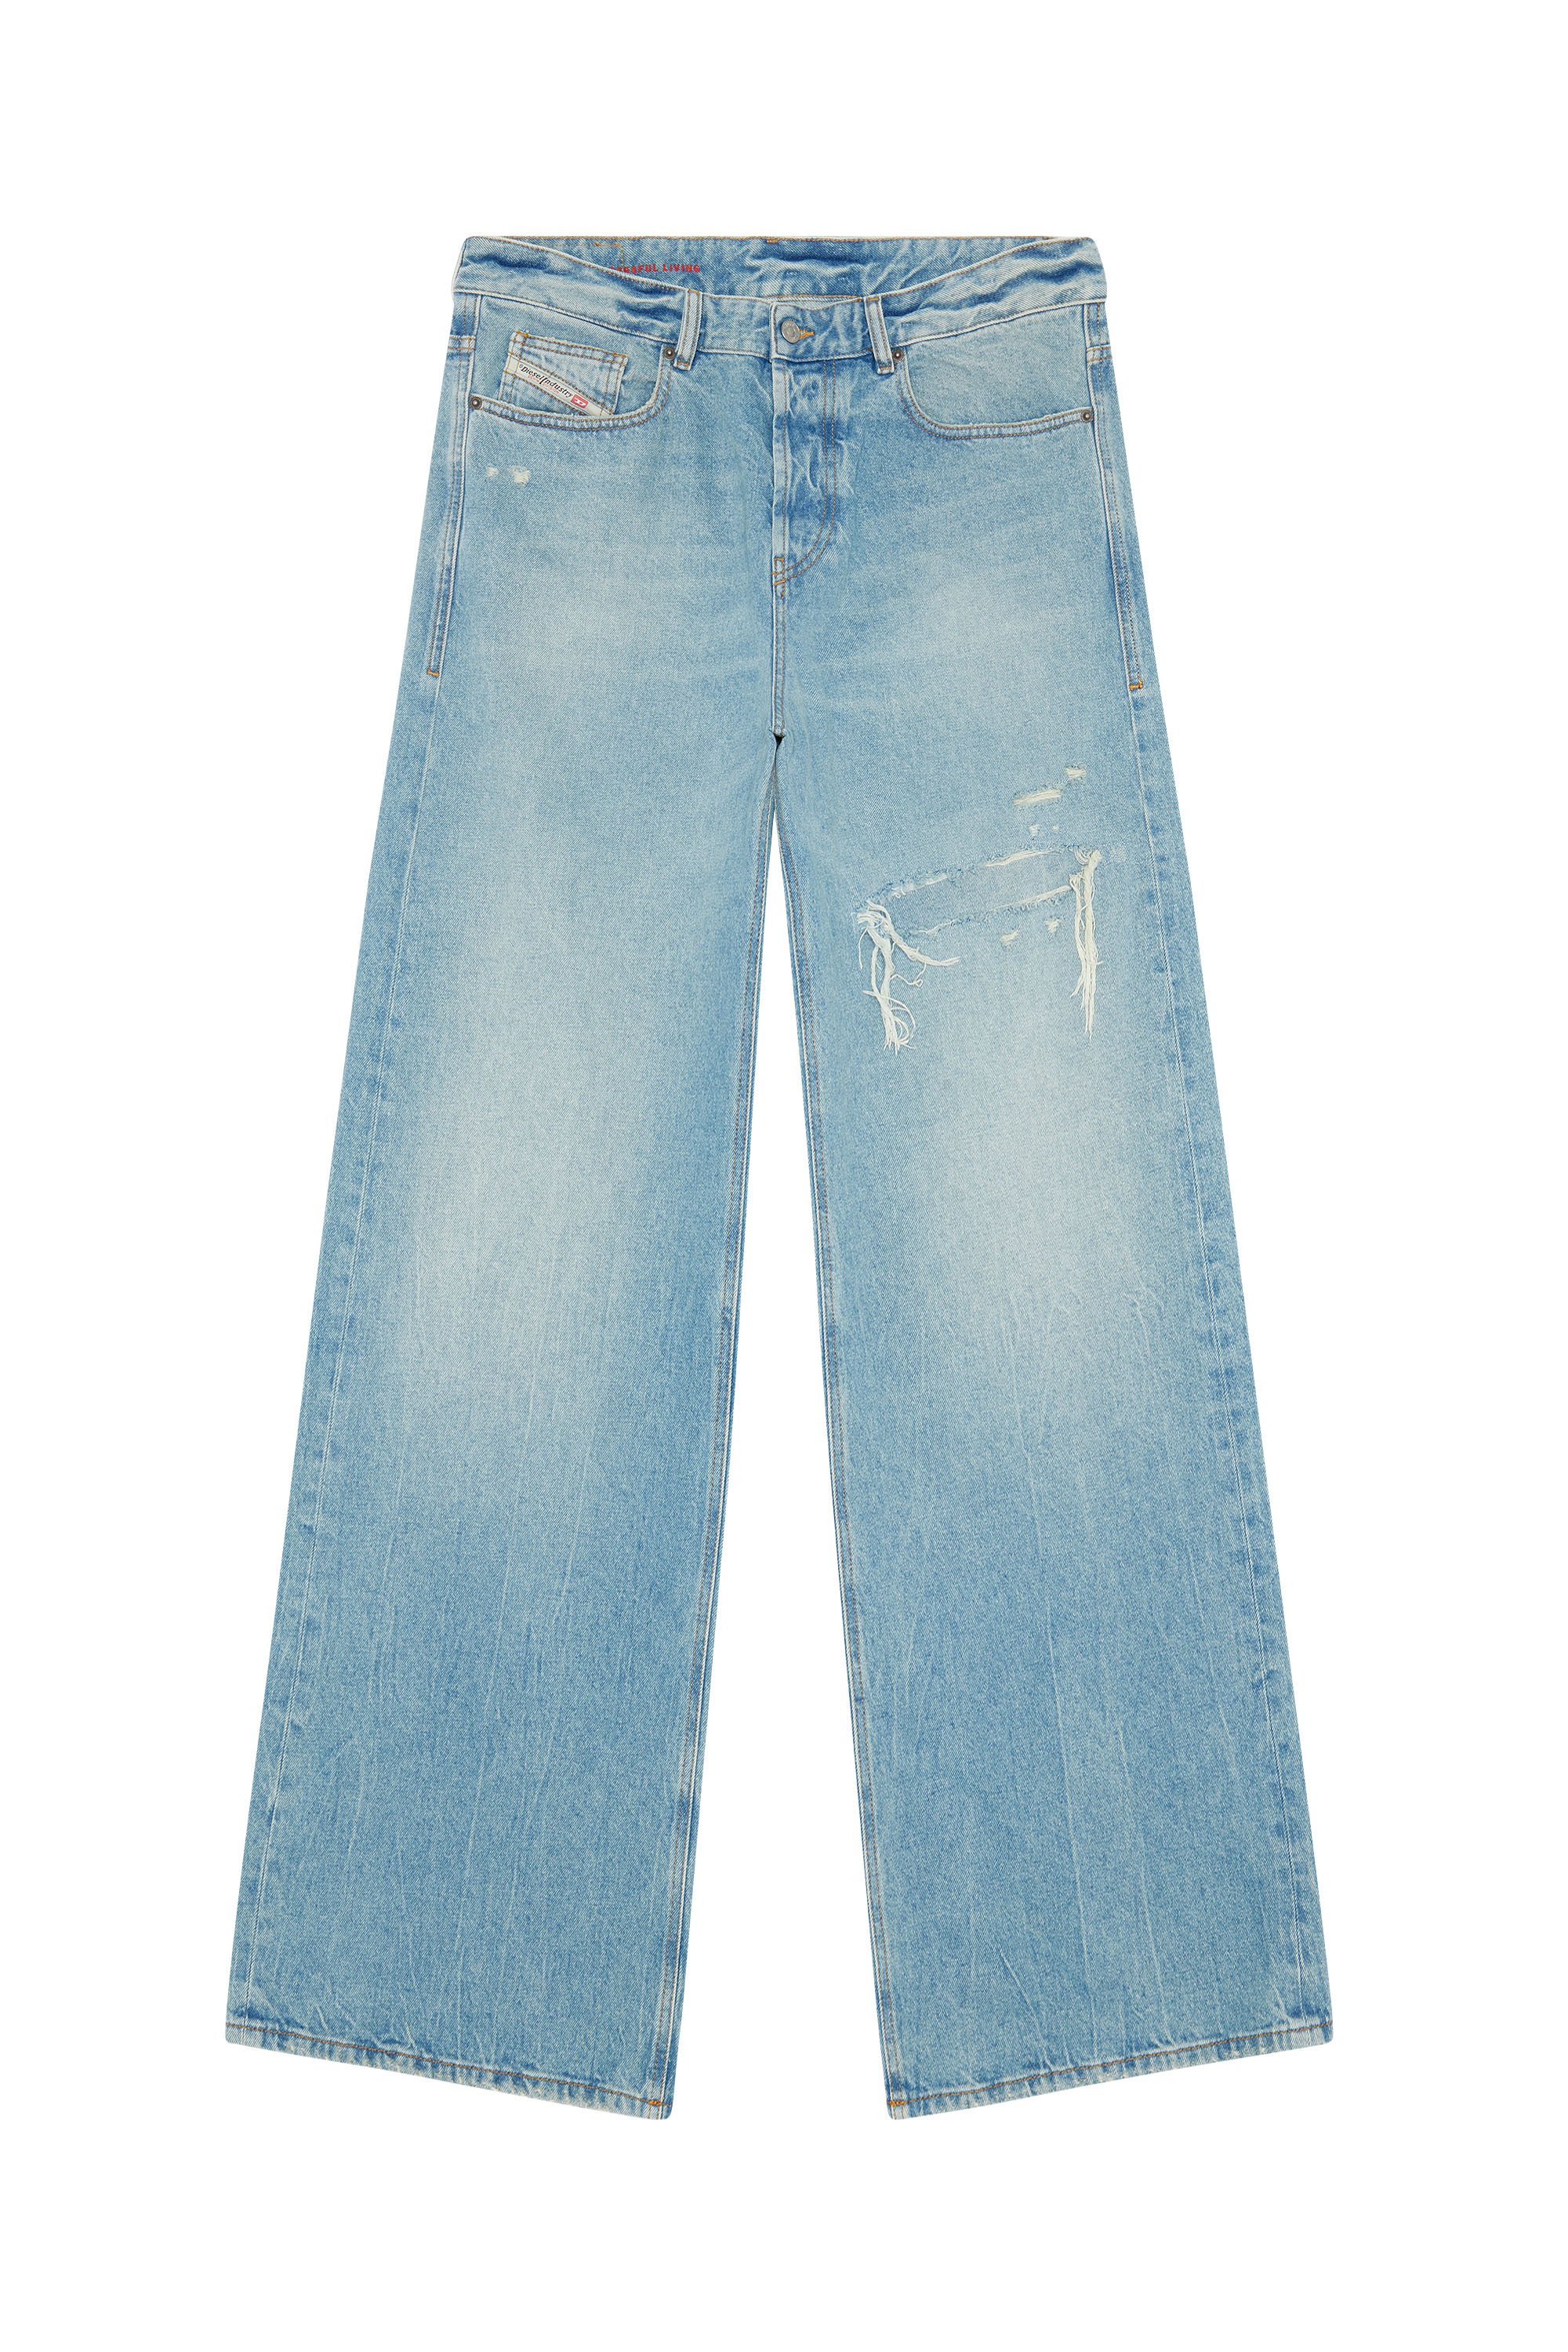 Diesel - Straight Jeans D-Rise 09E25, Hombre Straight Jeans - D-Rise in Azul marino - Image 3